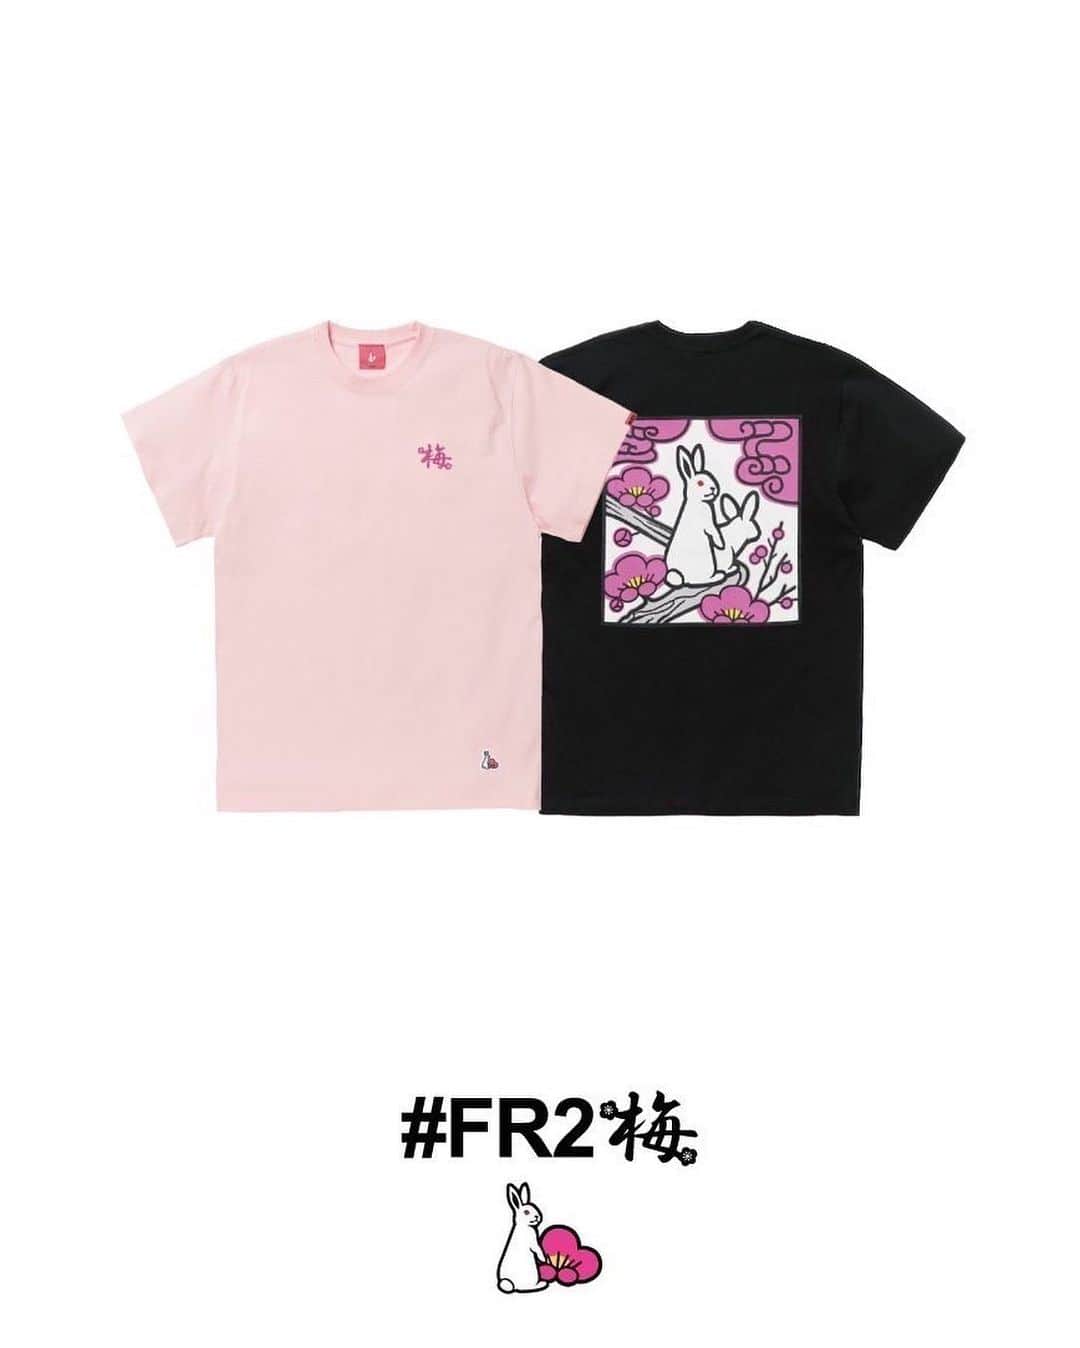 #FR2梅(UME)のインスタグラム：「#FR2梅 Spring 23 collection🐇🐇🔥   "Hanahuda Logo"  We will be selling the following products starting on 2023/4/29 (Sat)  ■Details of release #FR2 Stores 2023/4/29（Sat） From opening times * Restrictions may be placed on certain purchases within the store.  2023/4/29（Sat）より下記の商品を発売します。  Hanahuda Logo T-shirt ¥7,700（In Tax）  #FR2梅店 2023/4/29（Sat） OPEN ※店舗での販売は購入制限を設ける場合があります。  #FR2梅 exclusive color.」